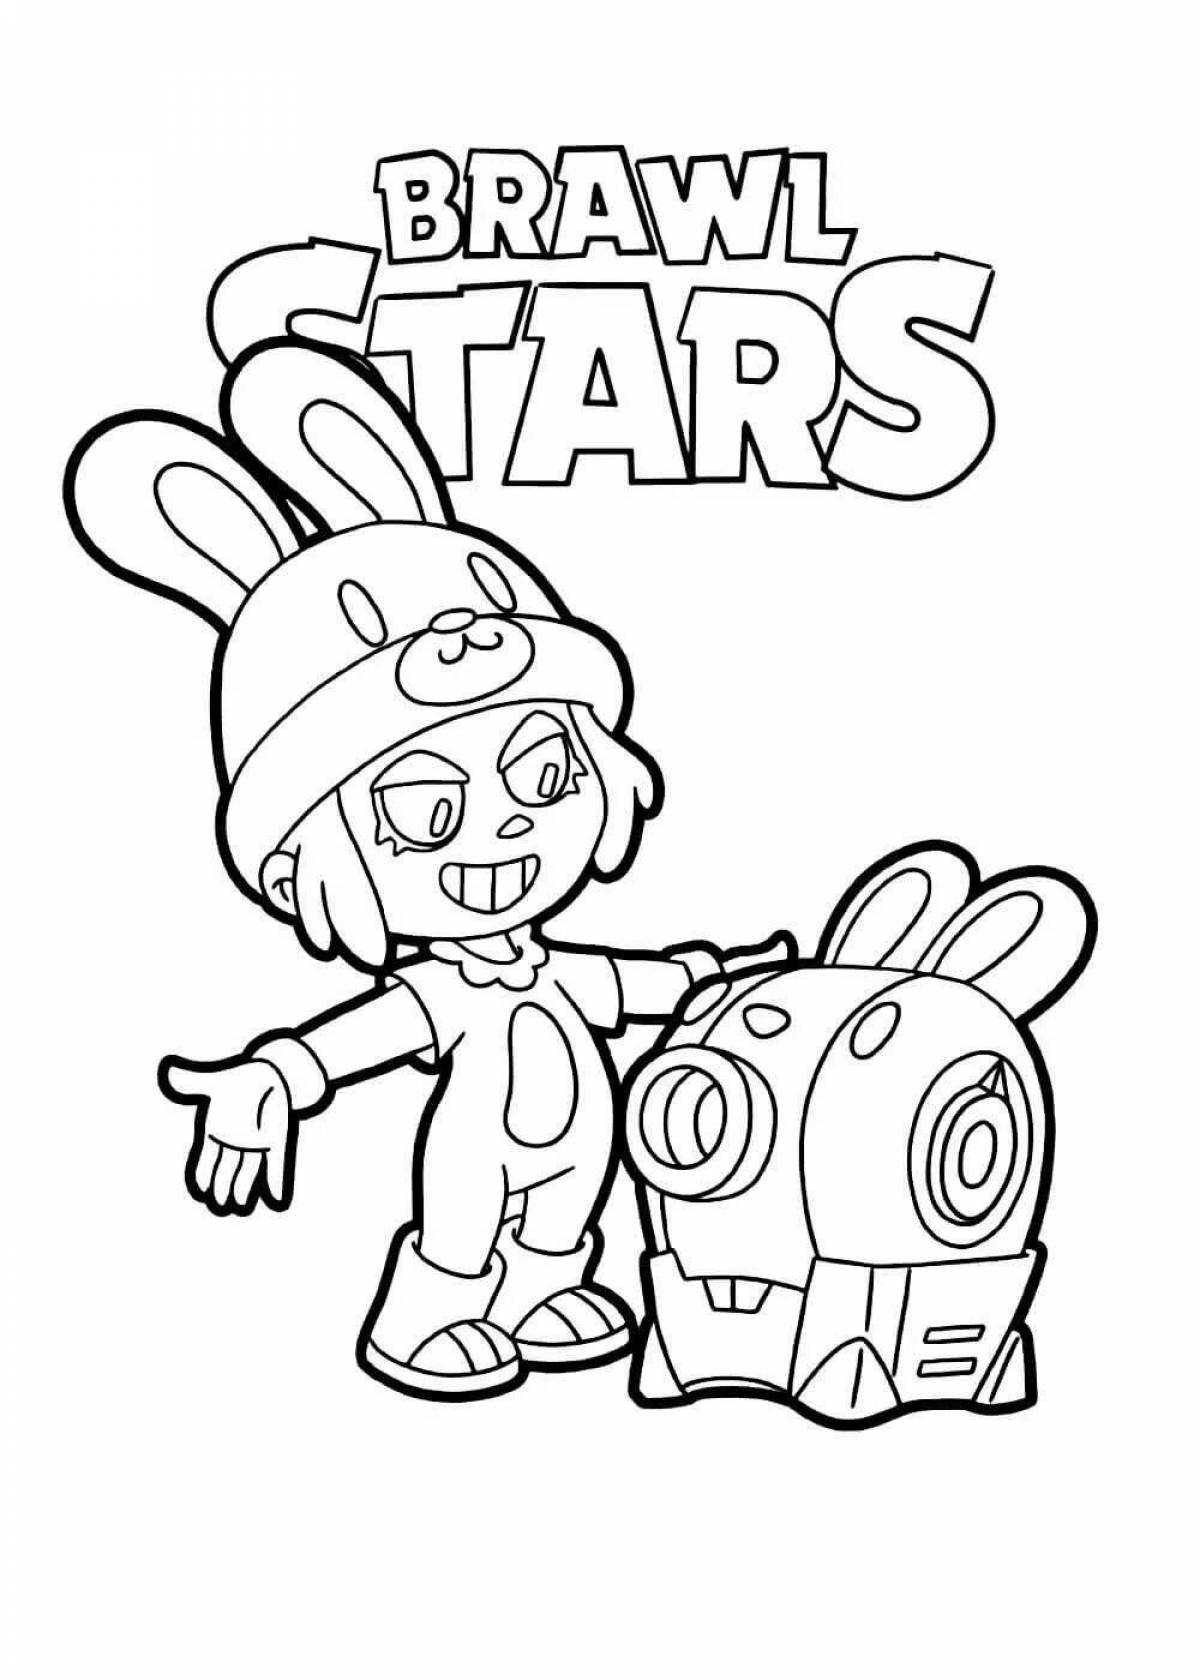 Dazzling brown stars coloring page